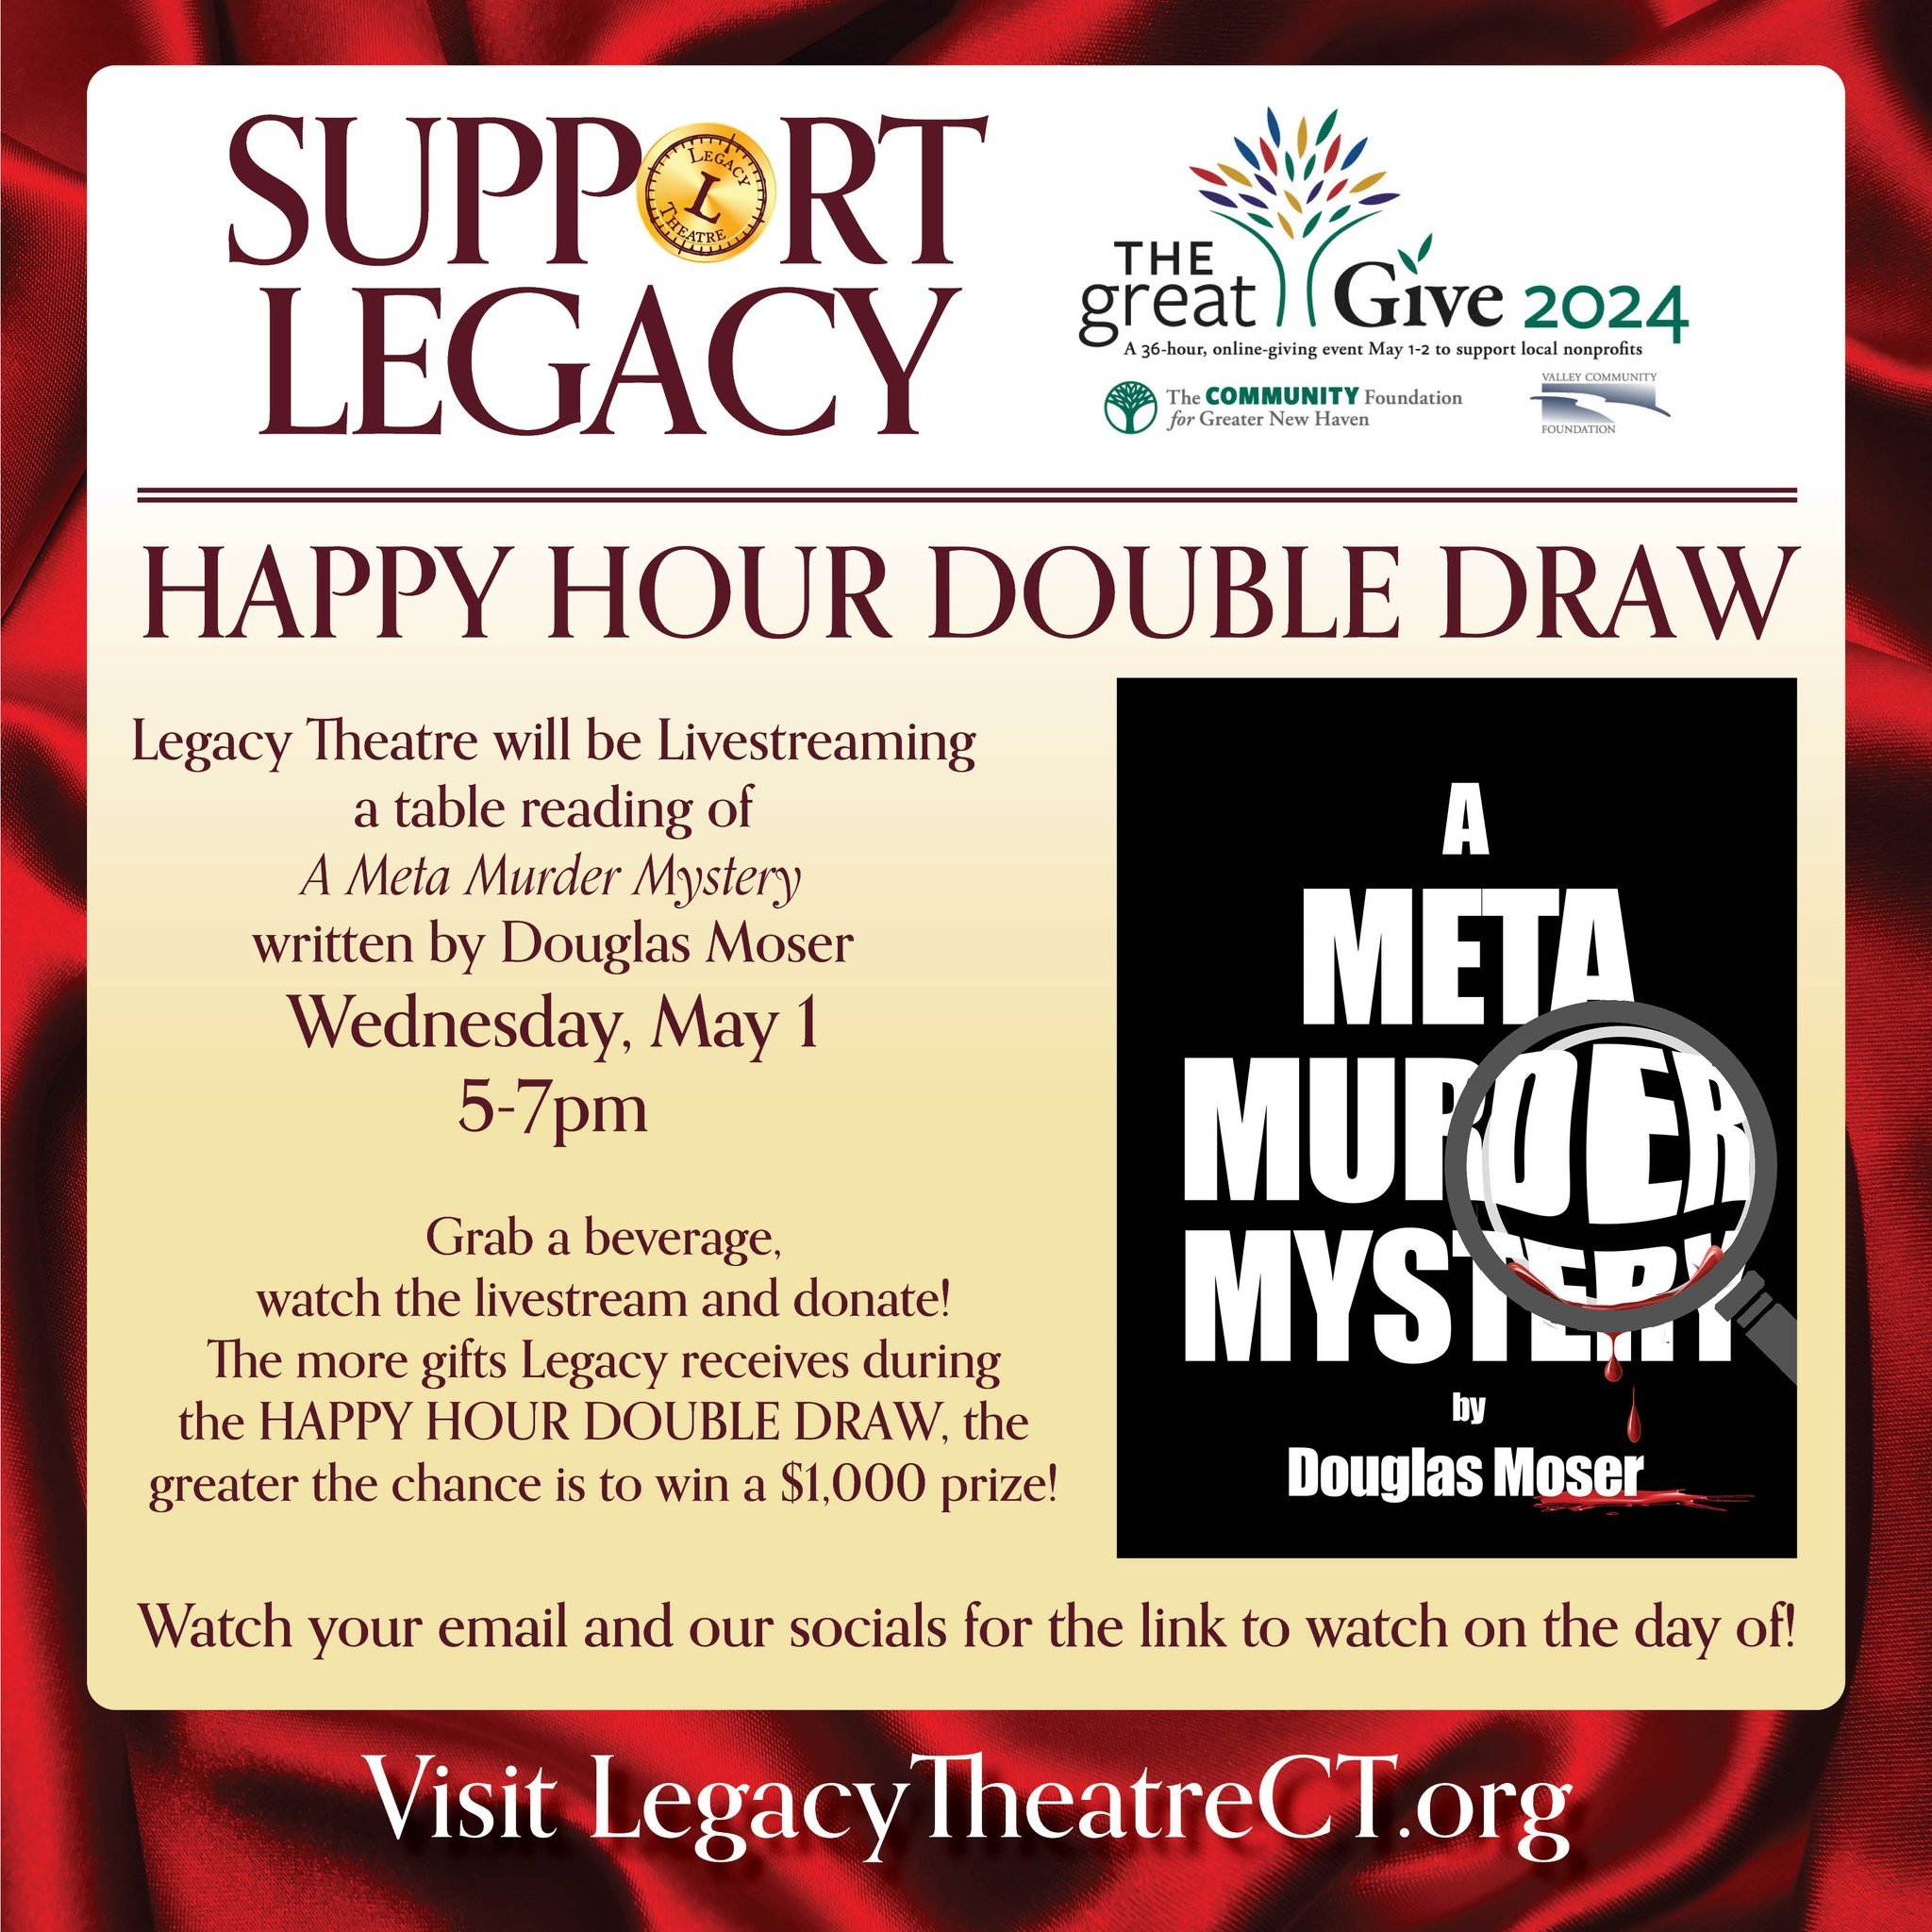 Legacy Theatre will be livestreaming a table reading of &ldquo;A Meta Murder Mystery&rdquo; written by Douglas Moser on Wednesday, May 1 from 5pm - 7pm during the Great Give! 

Grab a beverage, watch the livestream, and donate! The more gifts Legacy 